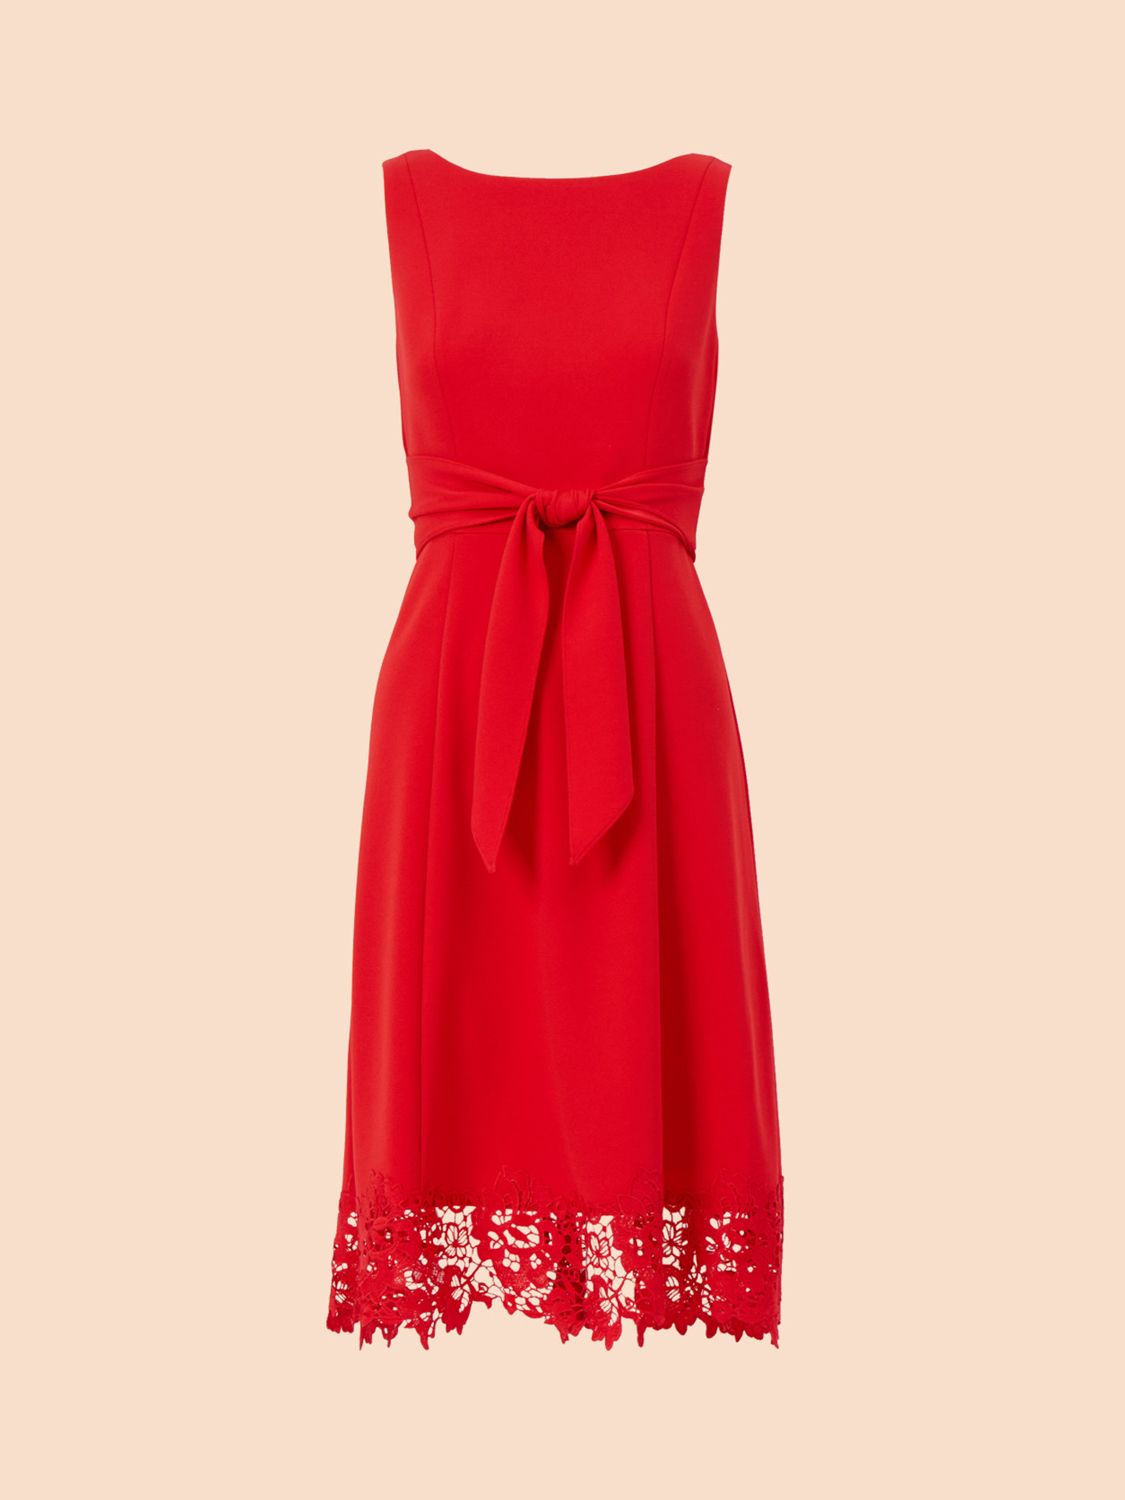 Adrianna Papell Knit Crepe Lace Midi Dress, Cherry Bliss, 6